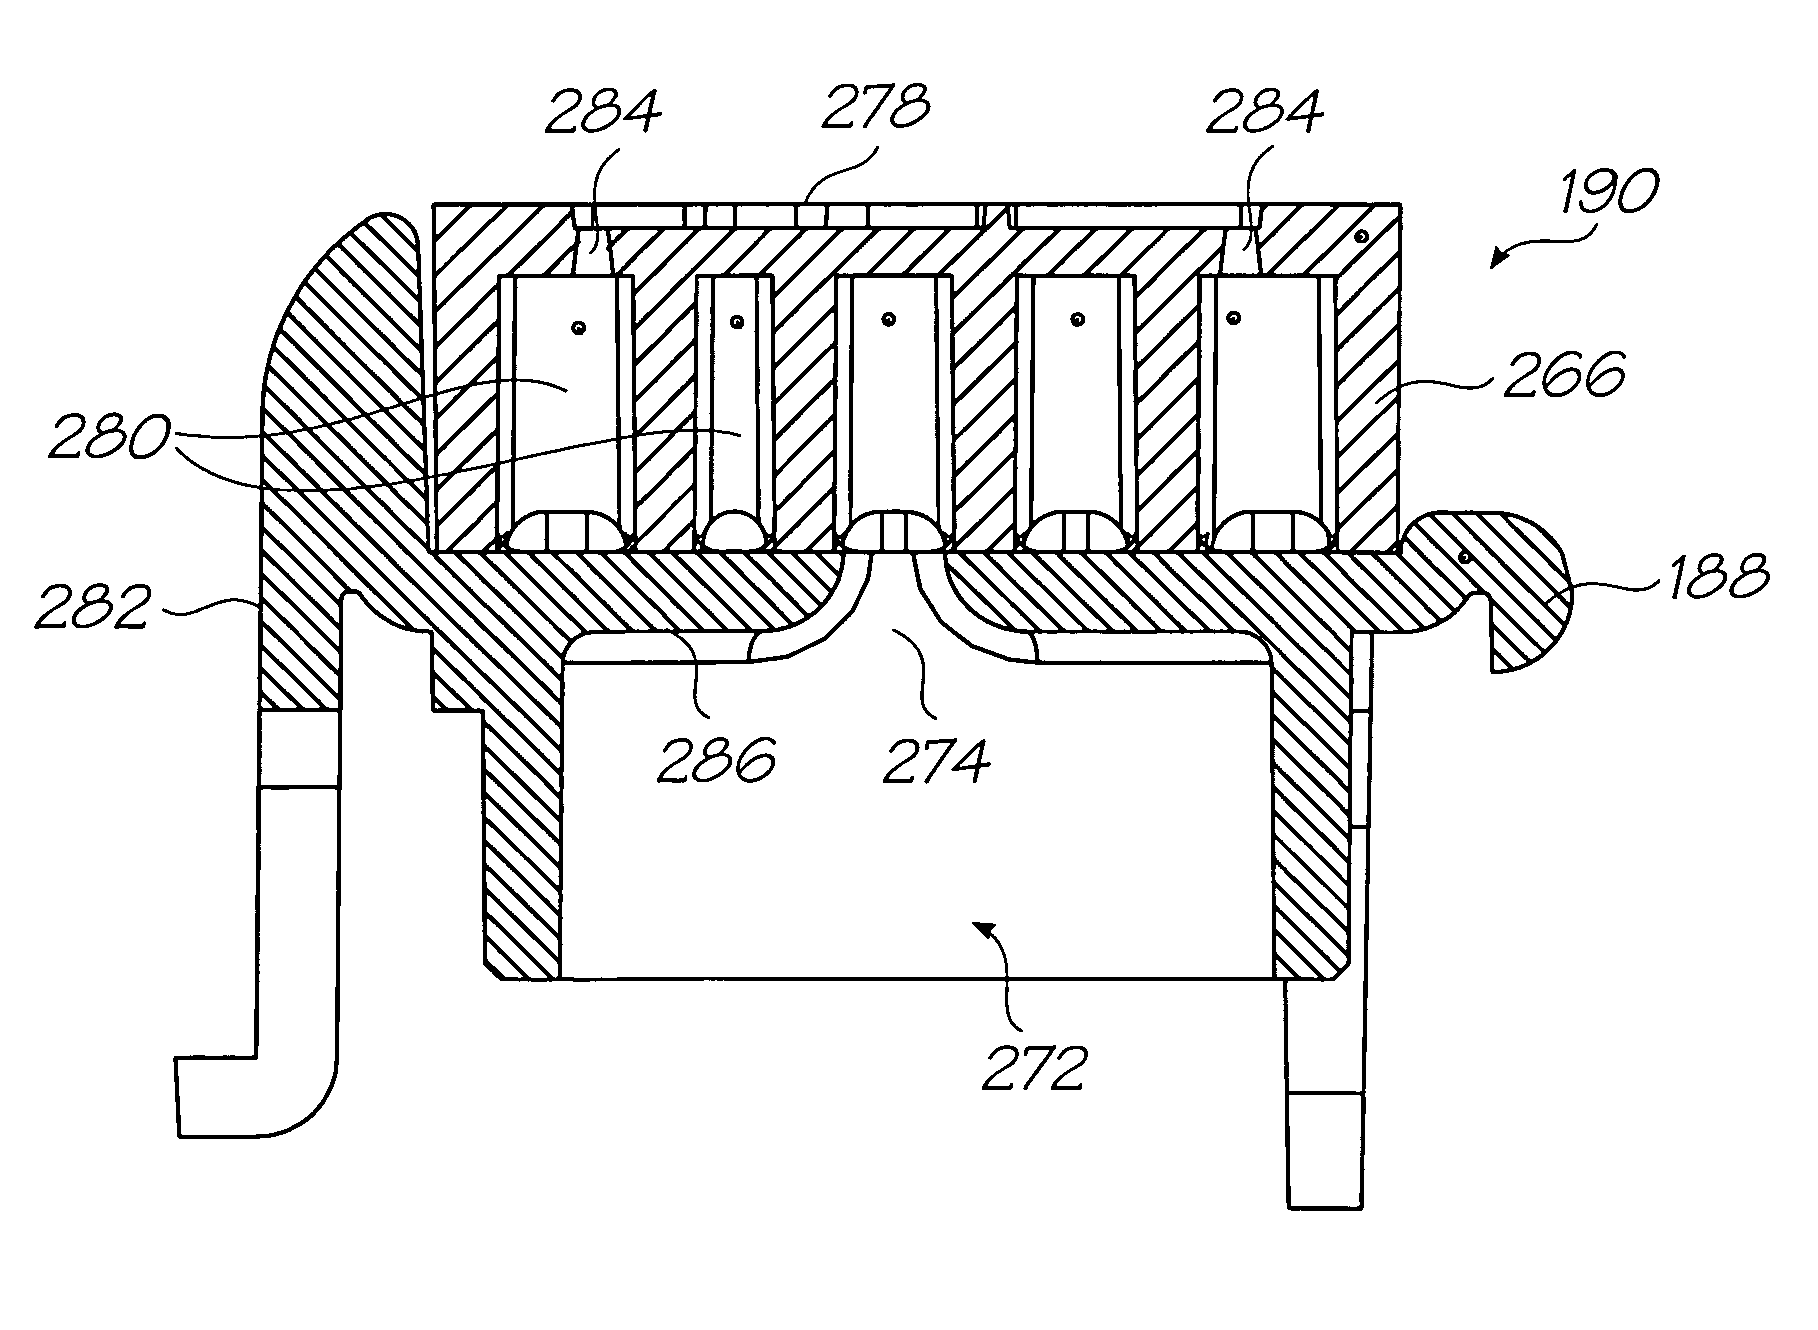 Printhead cartridge with bracing for reducing structural deflection